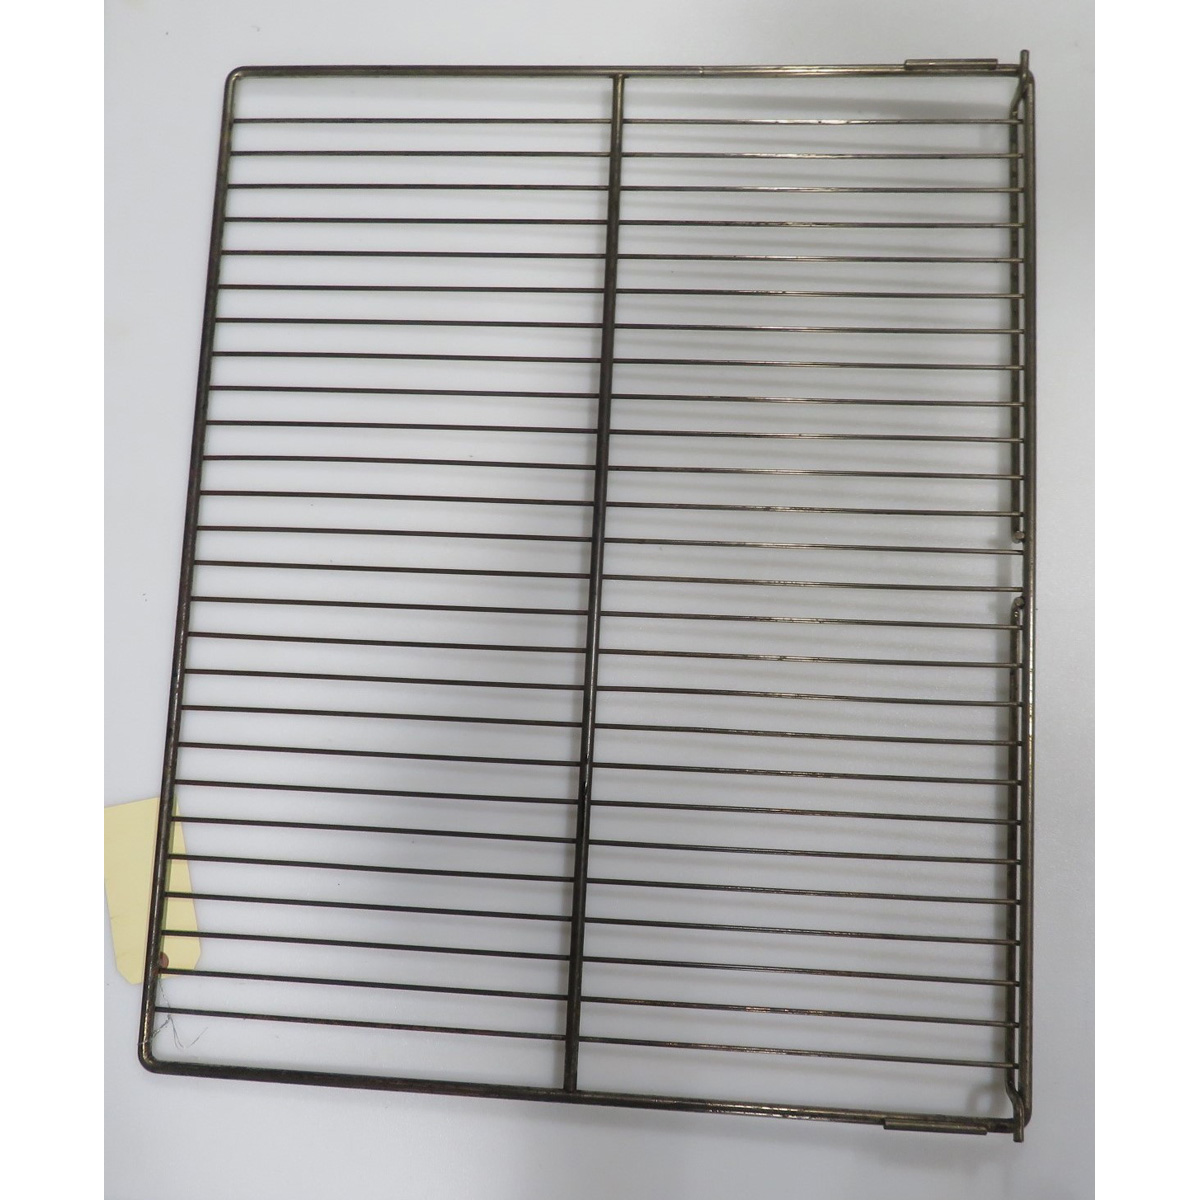 Duke 153230 Oven Rack, Standard, Used Excellent Condition image 1